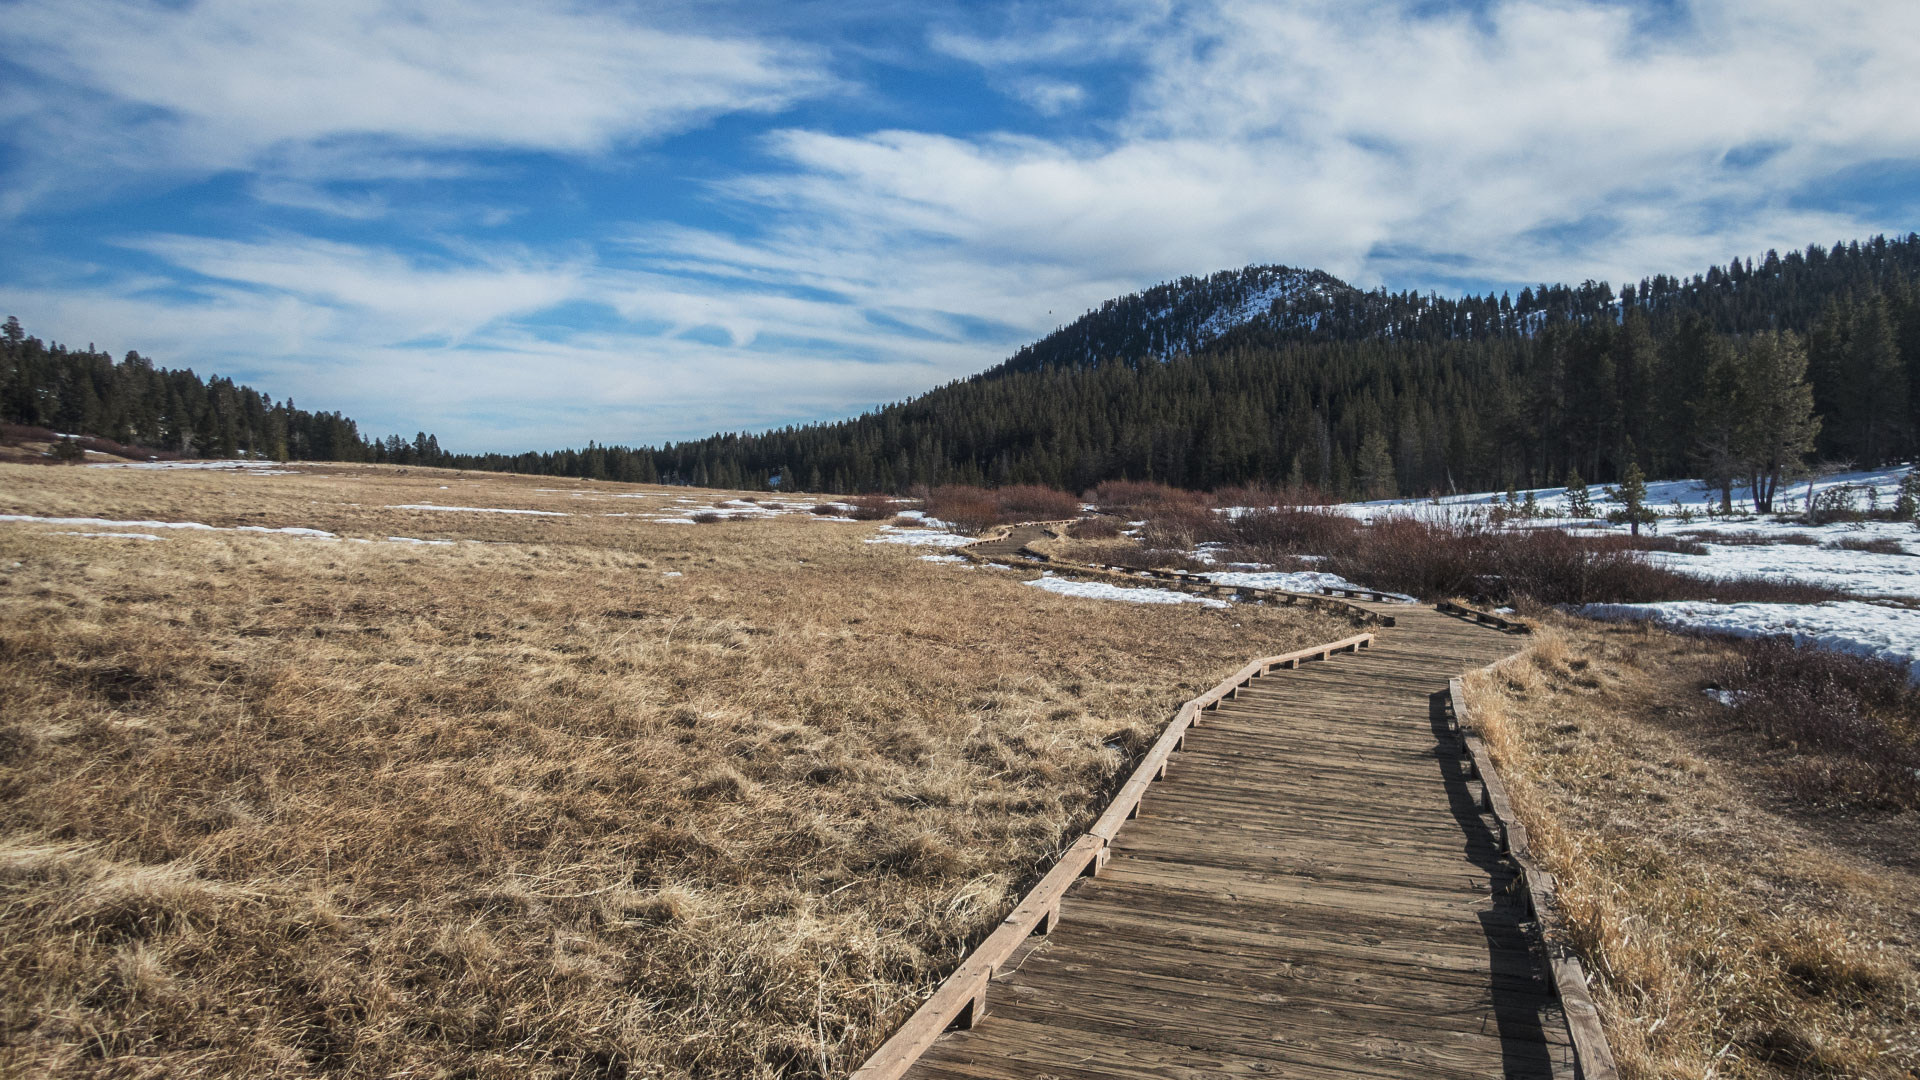 Wooden boardwalk over grassy field with mountains in background